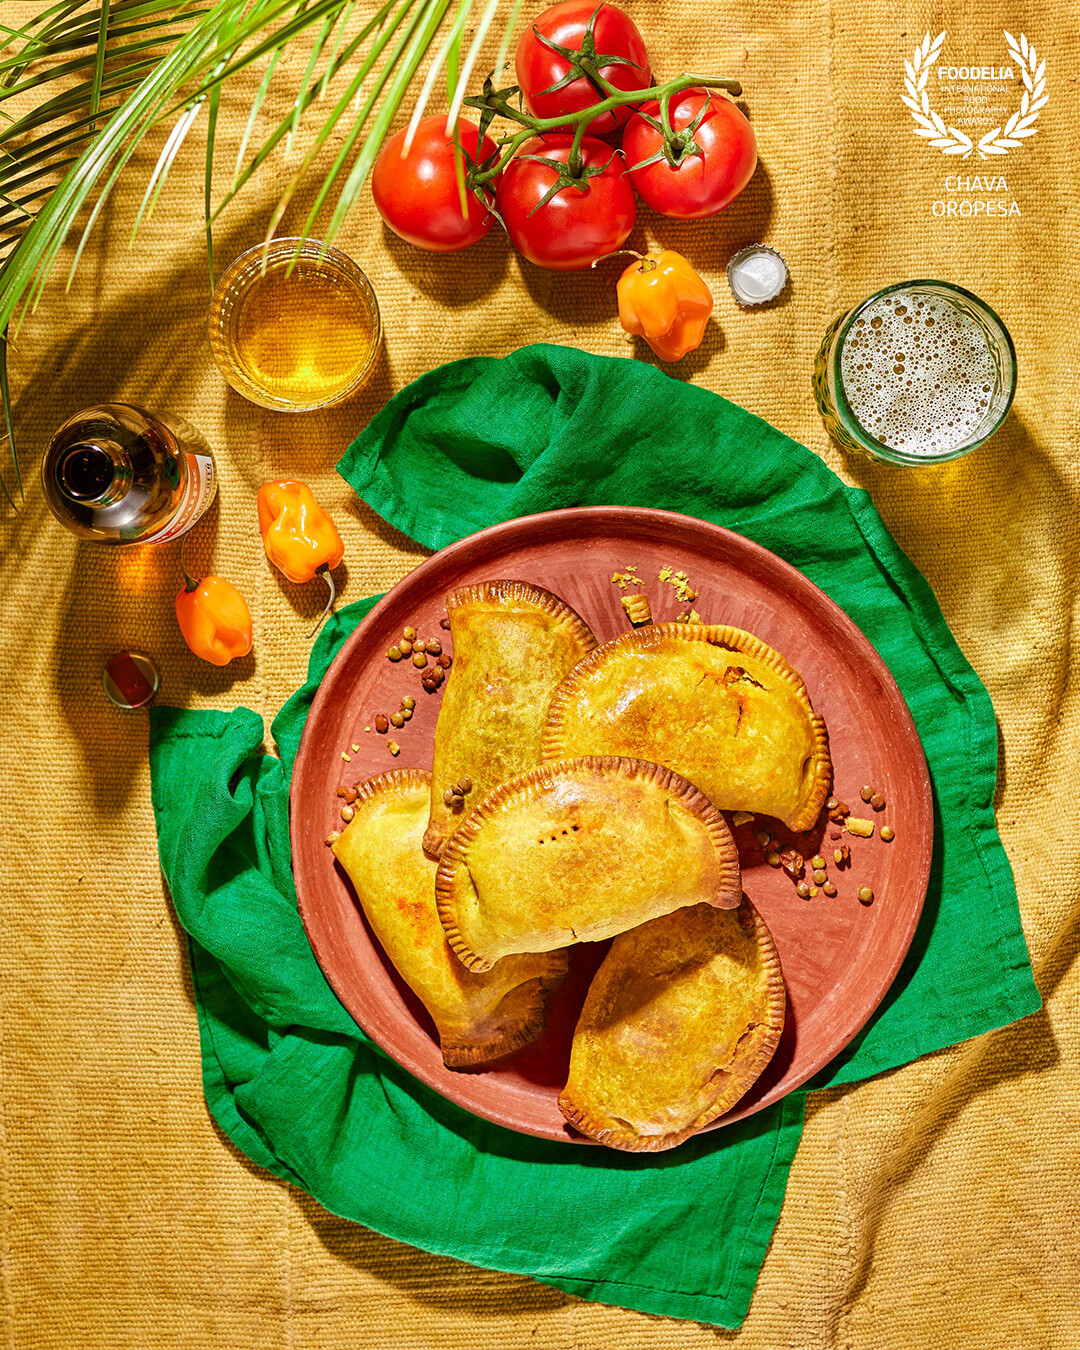 Editorial work for VegNews Magazine<br />
Beefy, Cheesy Golden Jamaican Patties, part of their summer spread.<br />
Food Styling: Lorena Masso